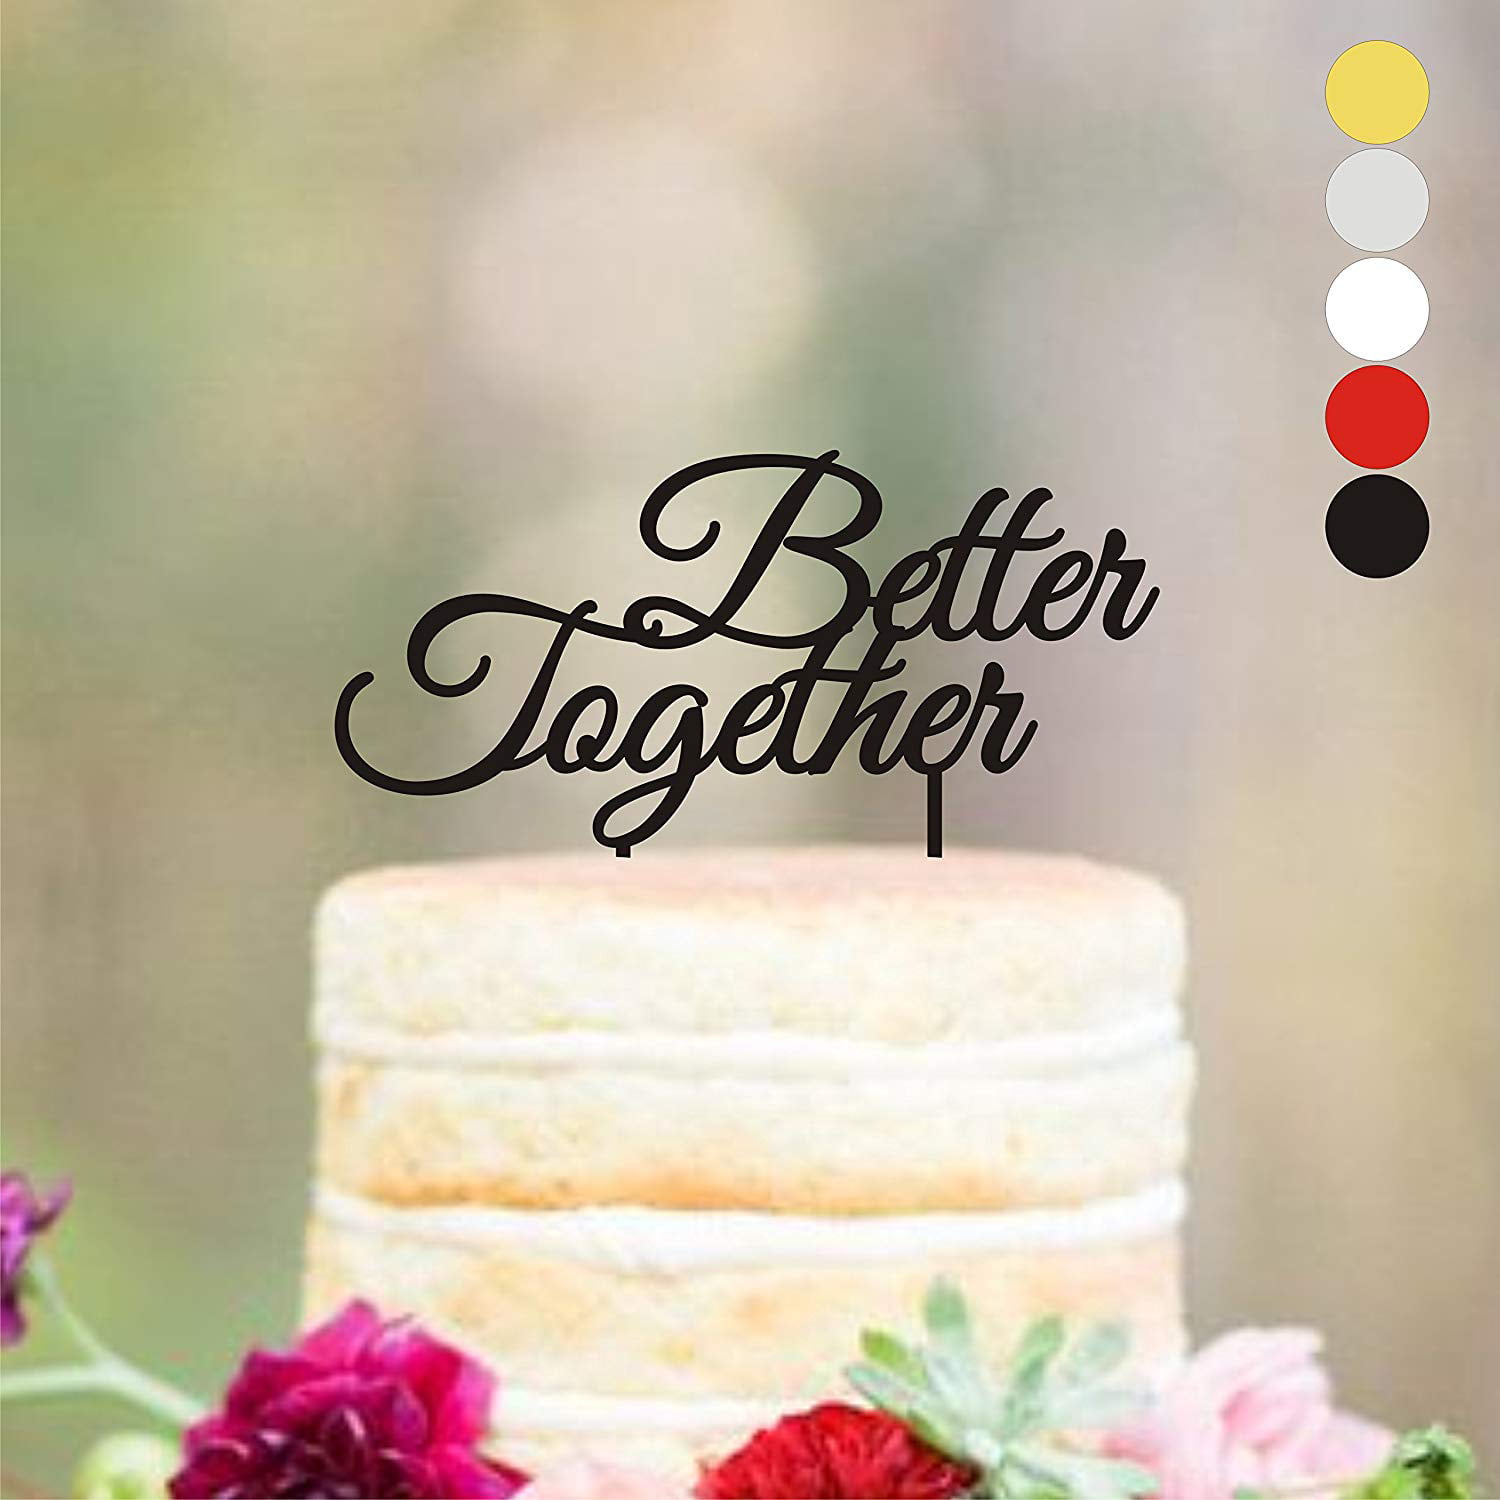 Engagment anniversary cake Wedding Love better together wooden Cake Topper 